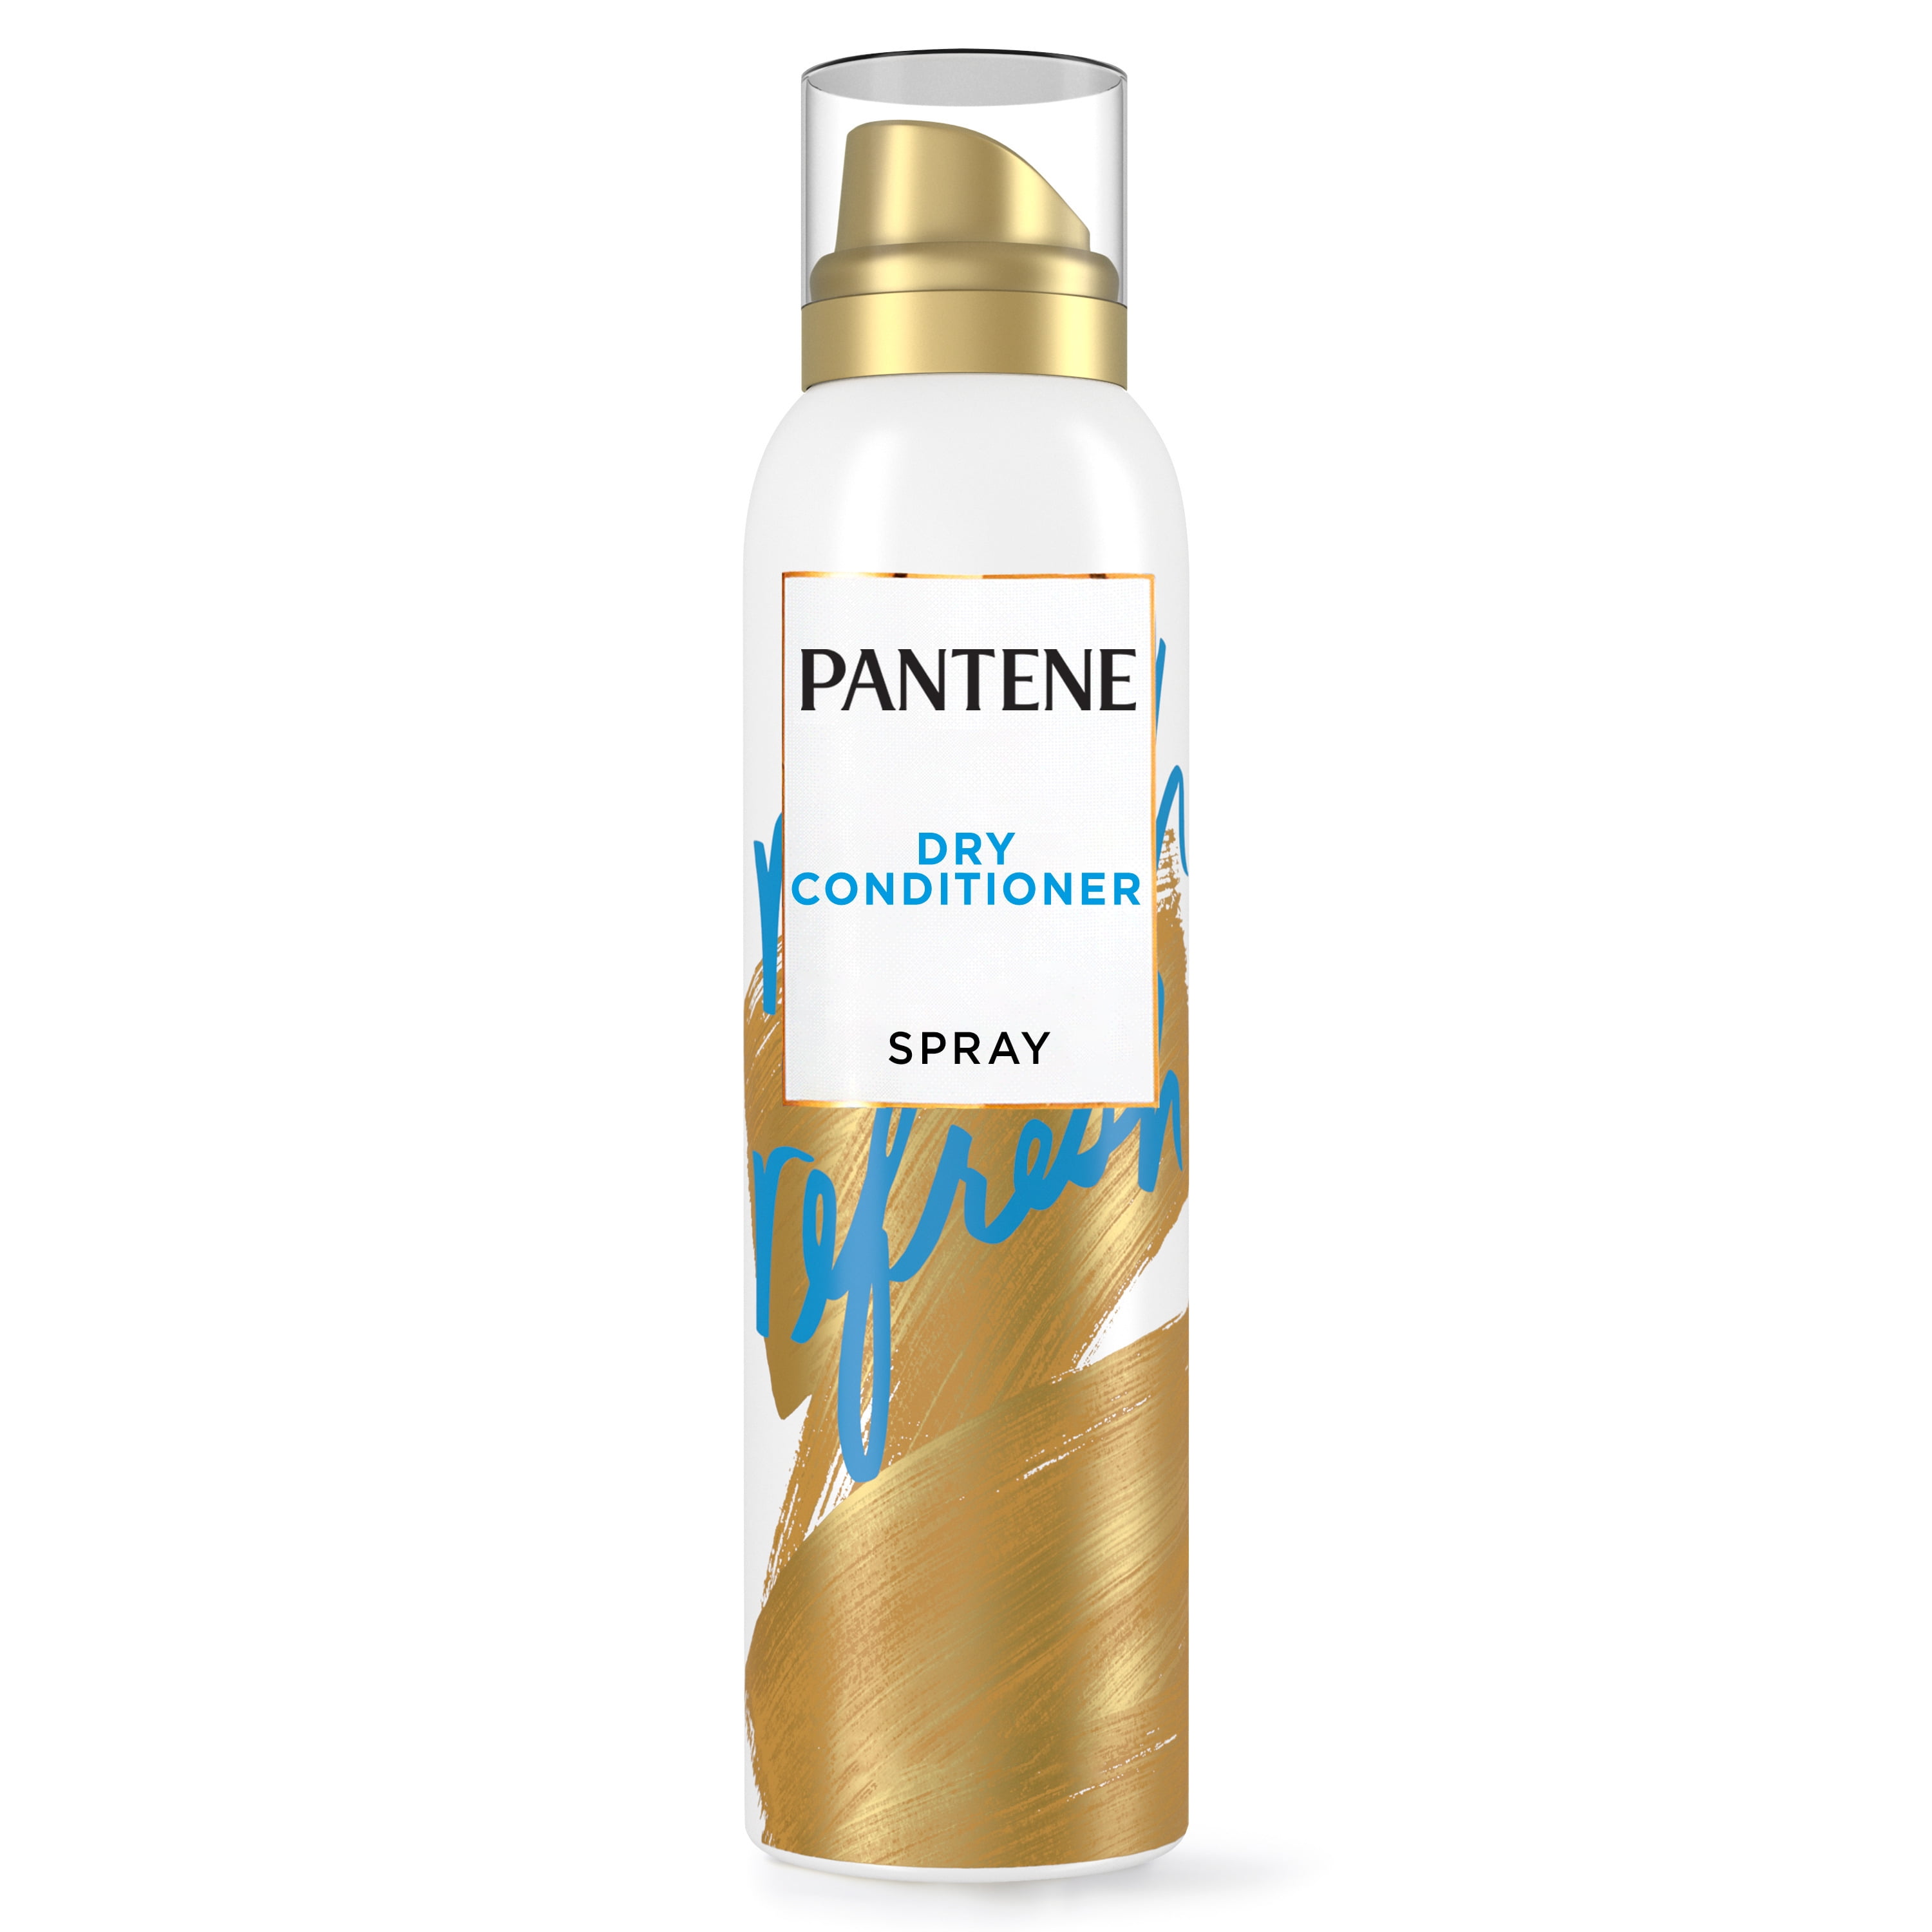 Pantene Dry Conditioner Spray for Hair, Hydrates and Softens Dry Hair with Vitamin B5, 3.9 oz